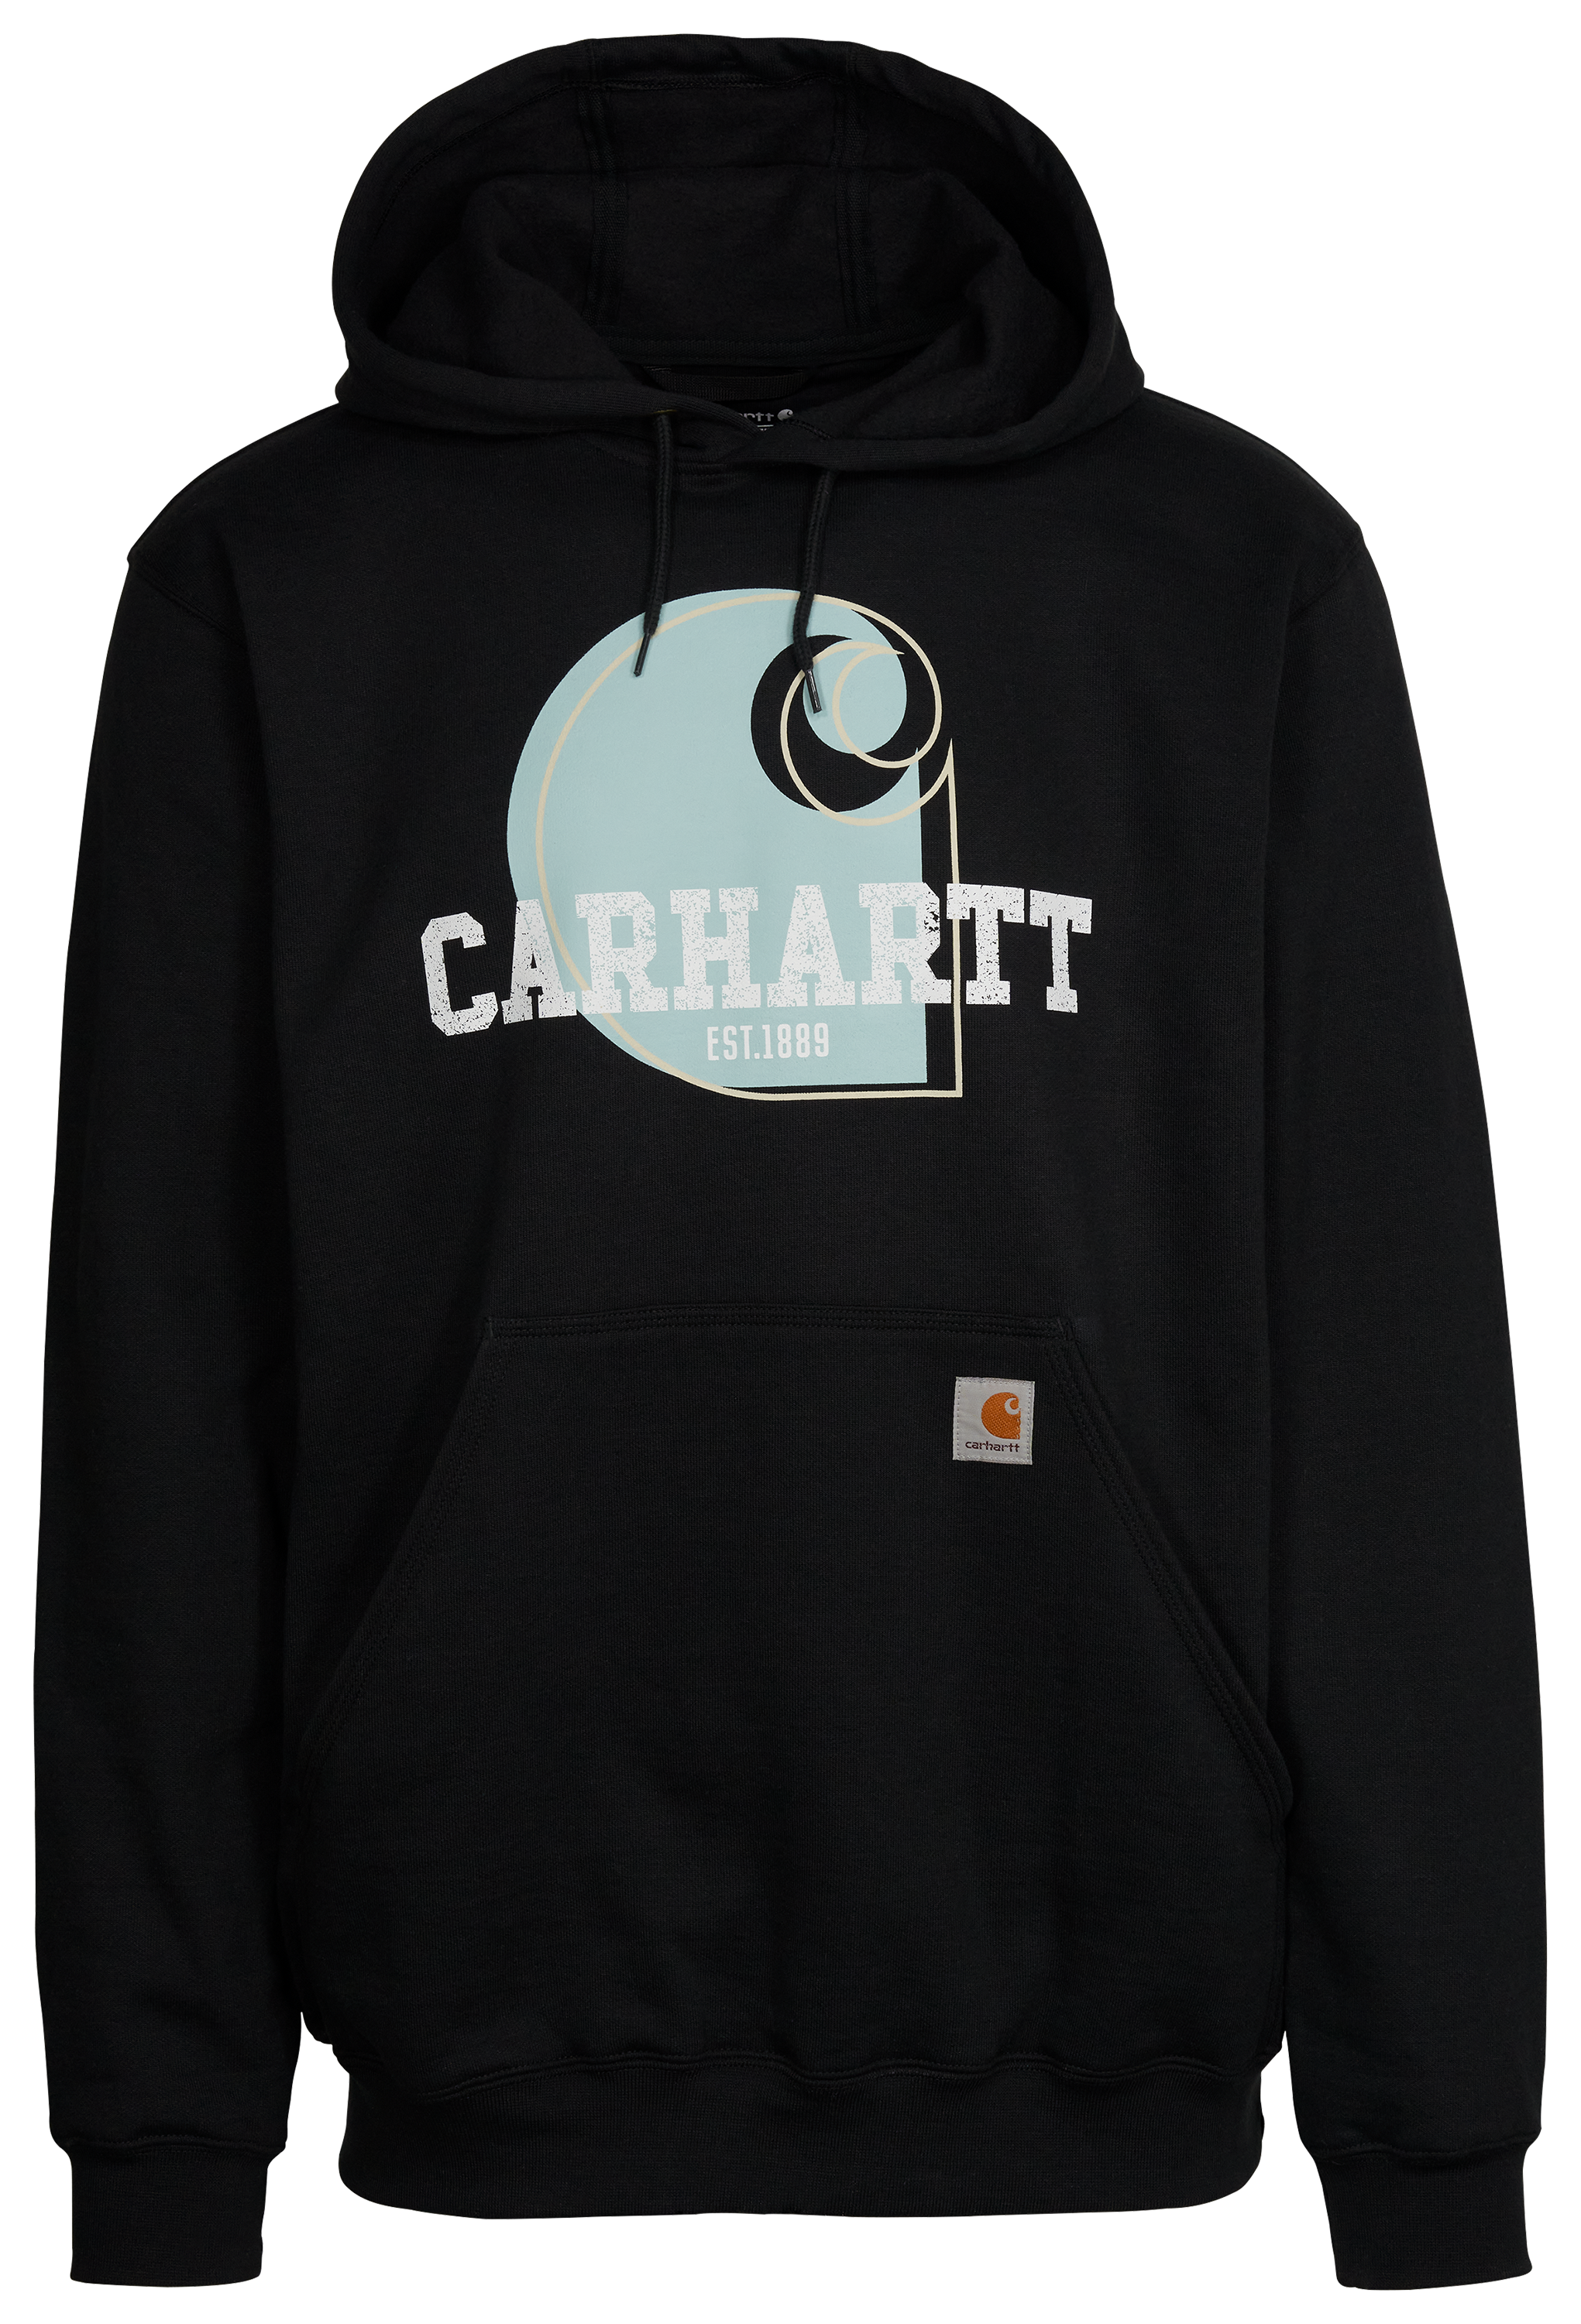 Carhartt Loose-Fit Midweight Logo Graphic Long-Sleeve Hoodie for Men - Skystone - XL